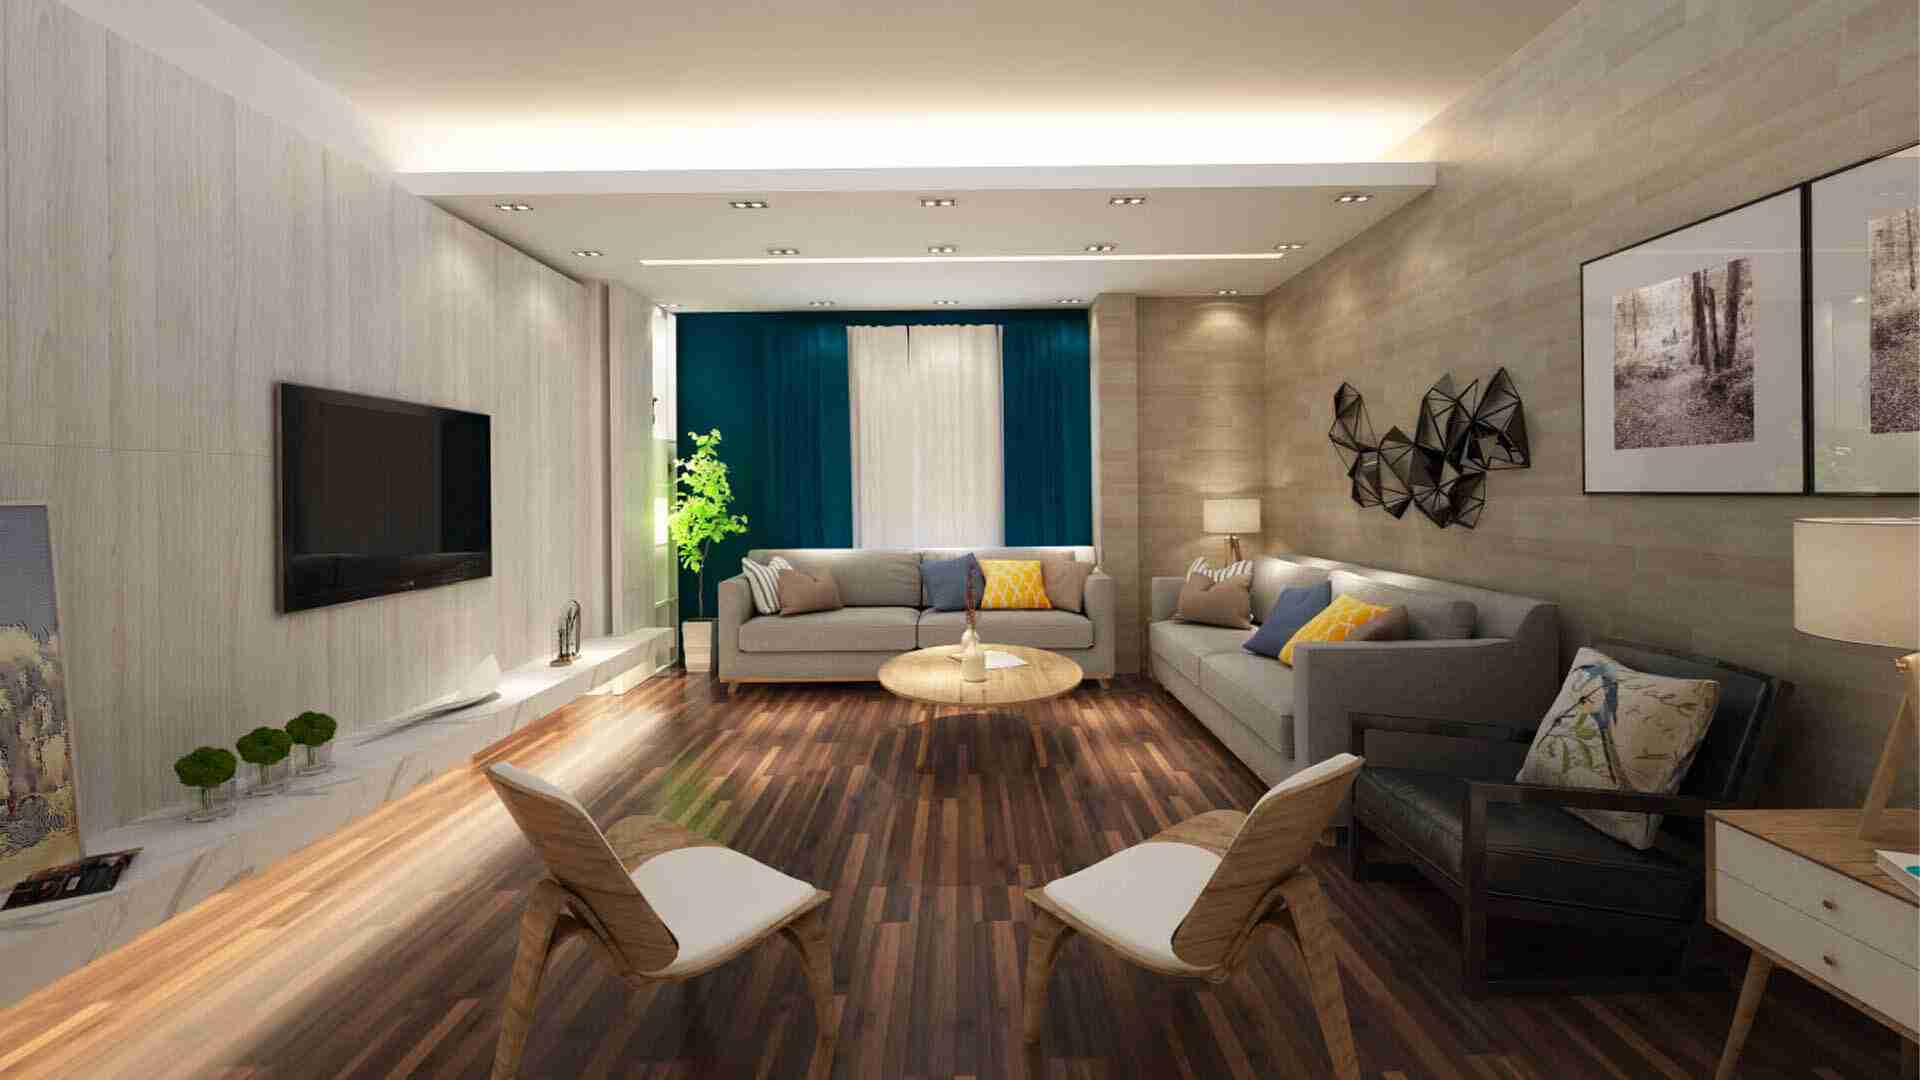 Creating a Luxurious Residence Interior Design on a Budget